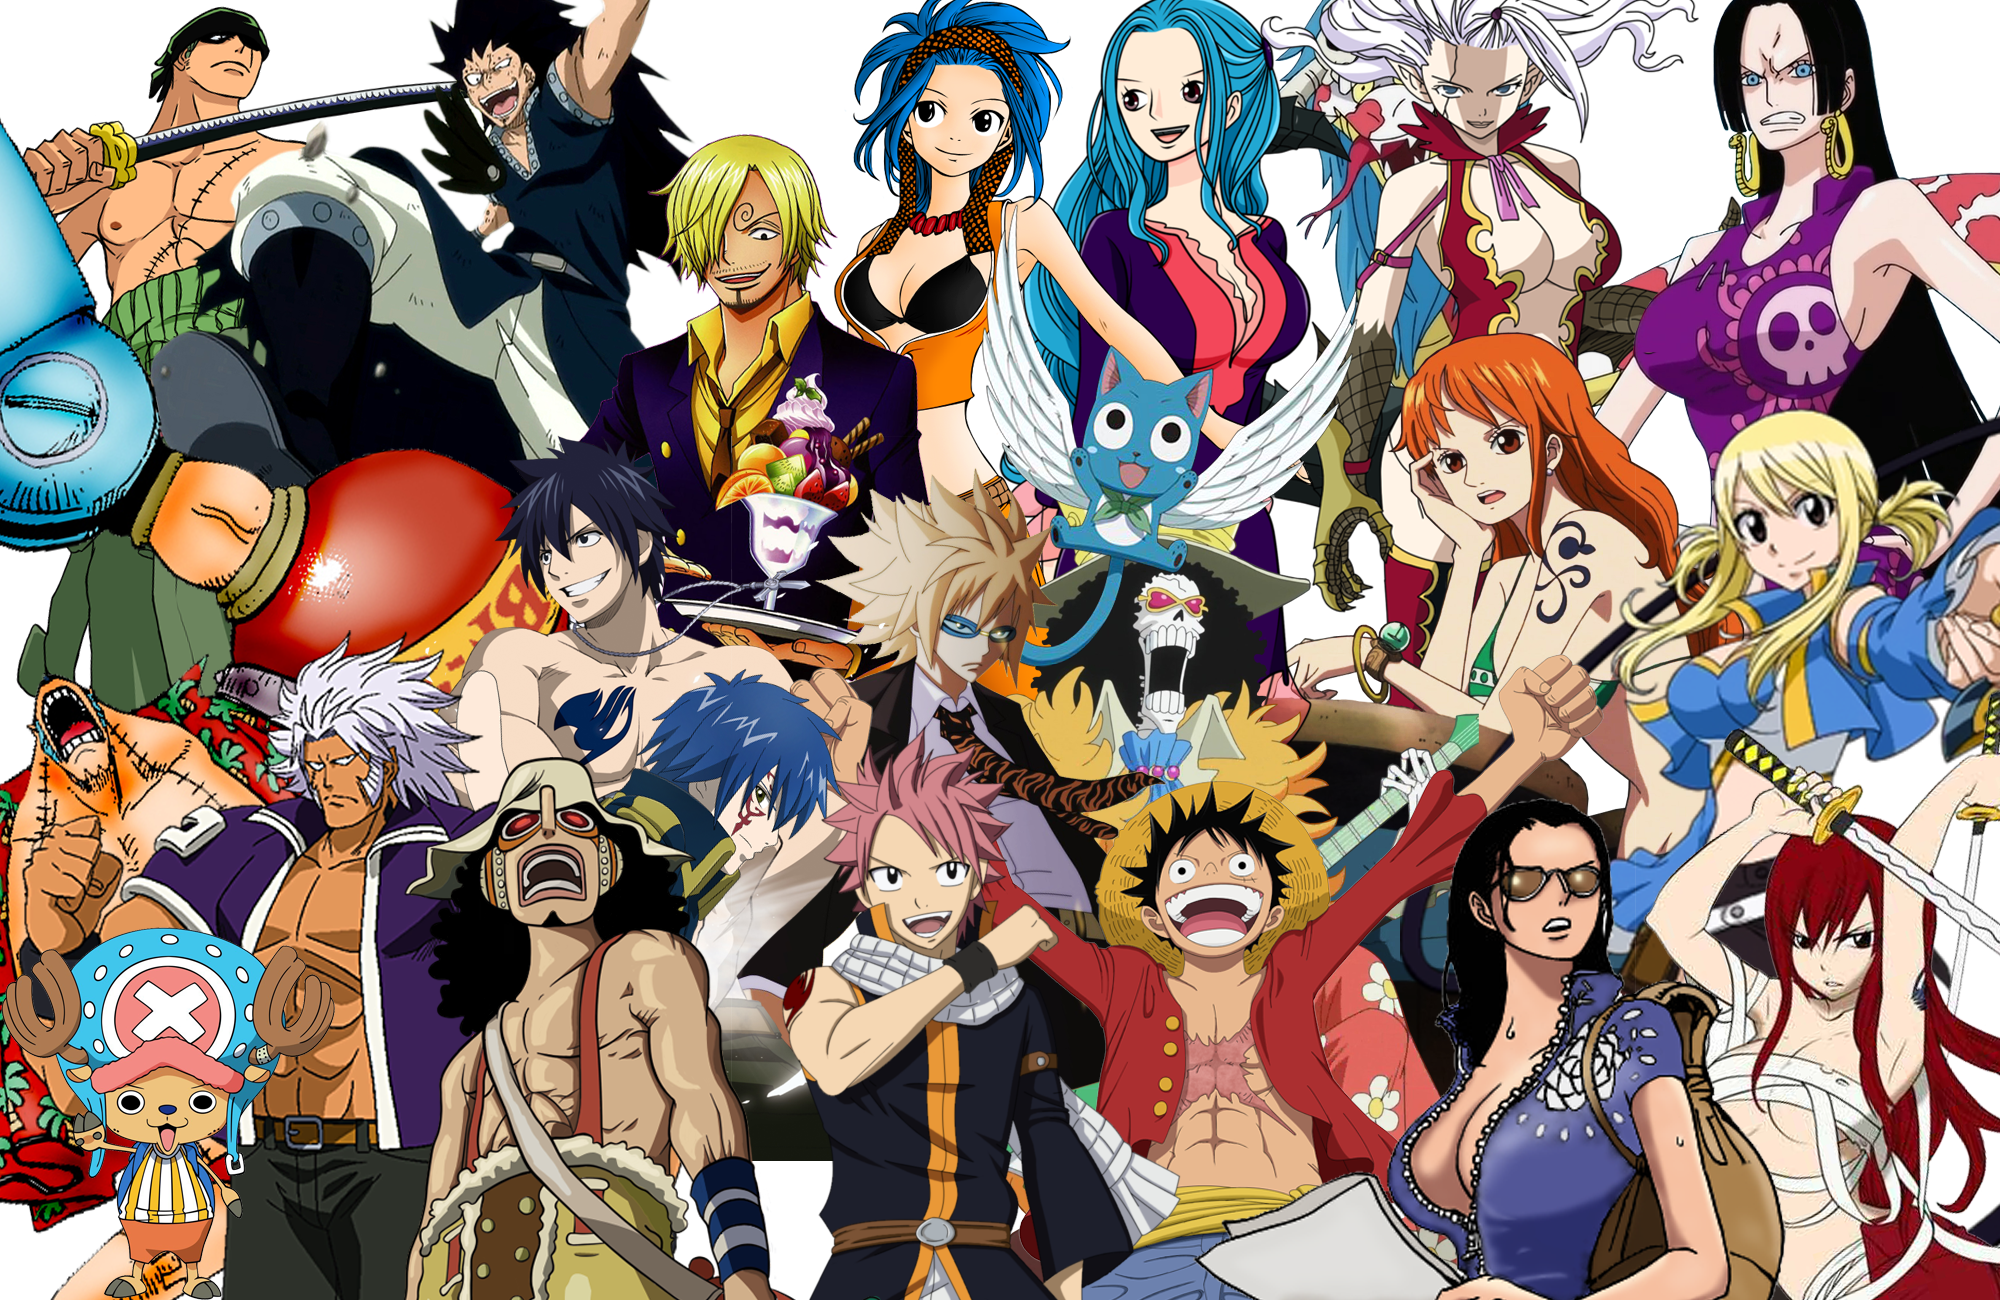 Characters, One Piece x Fairy Tail Wikia